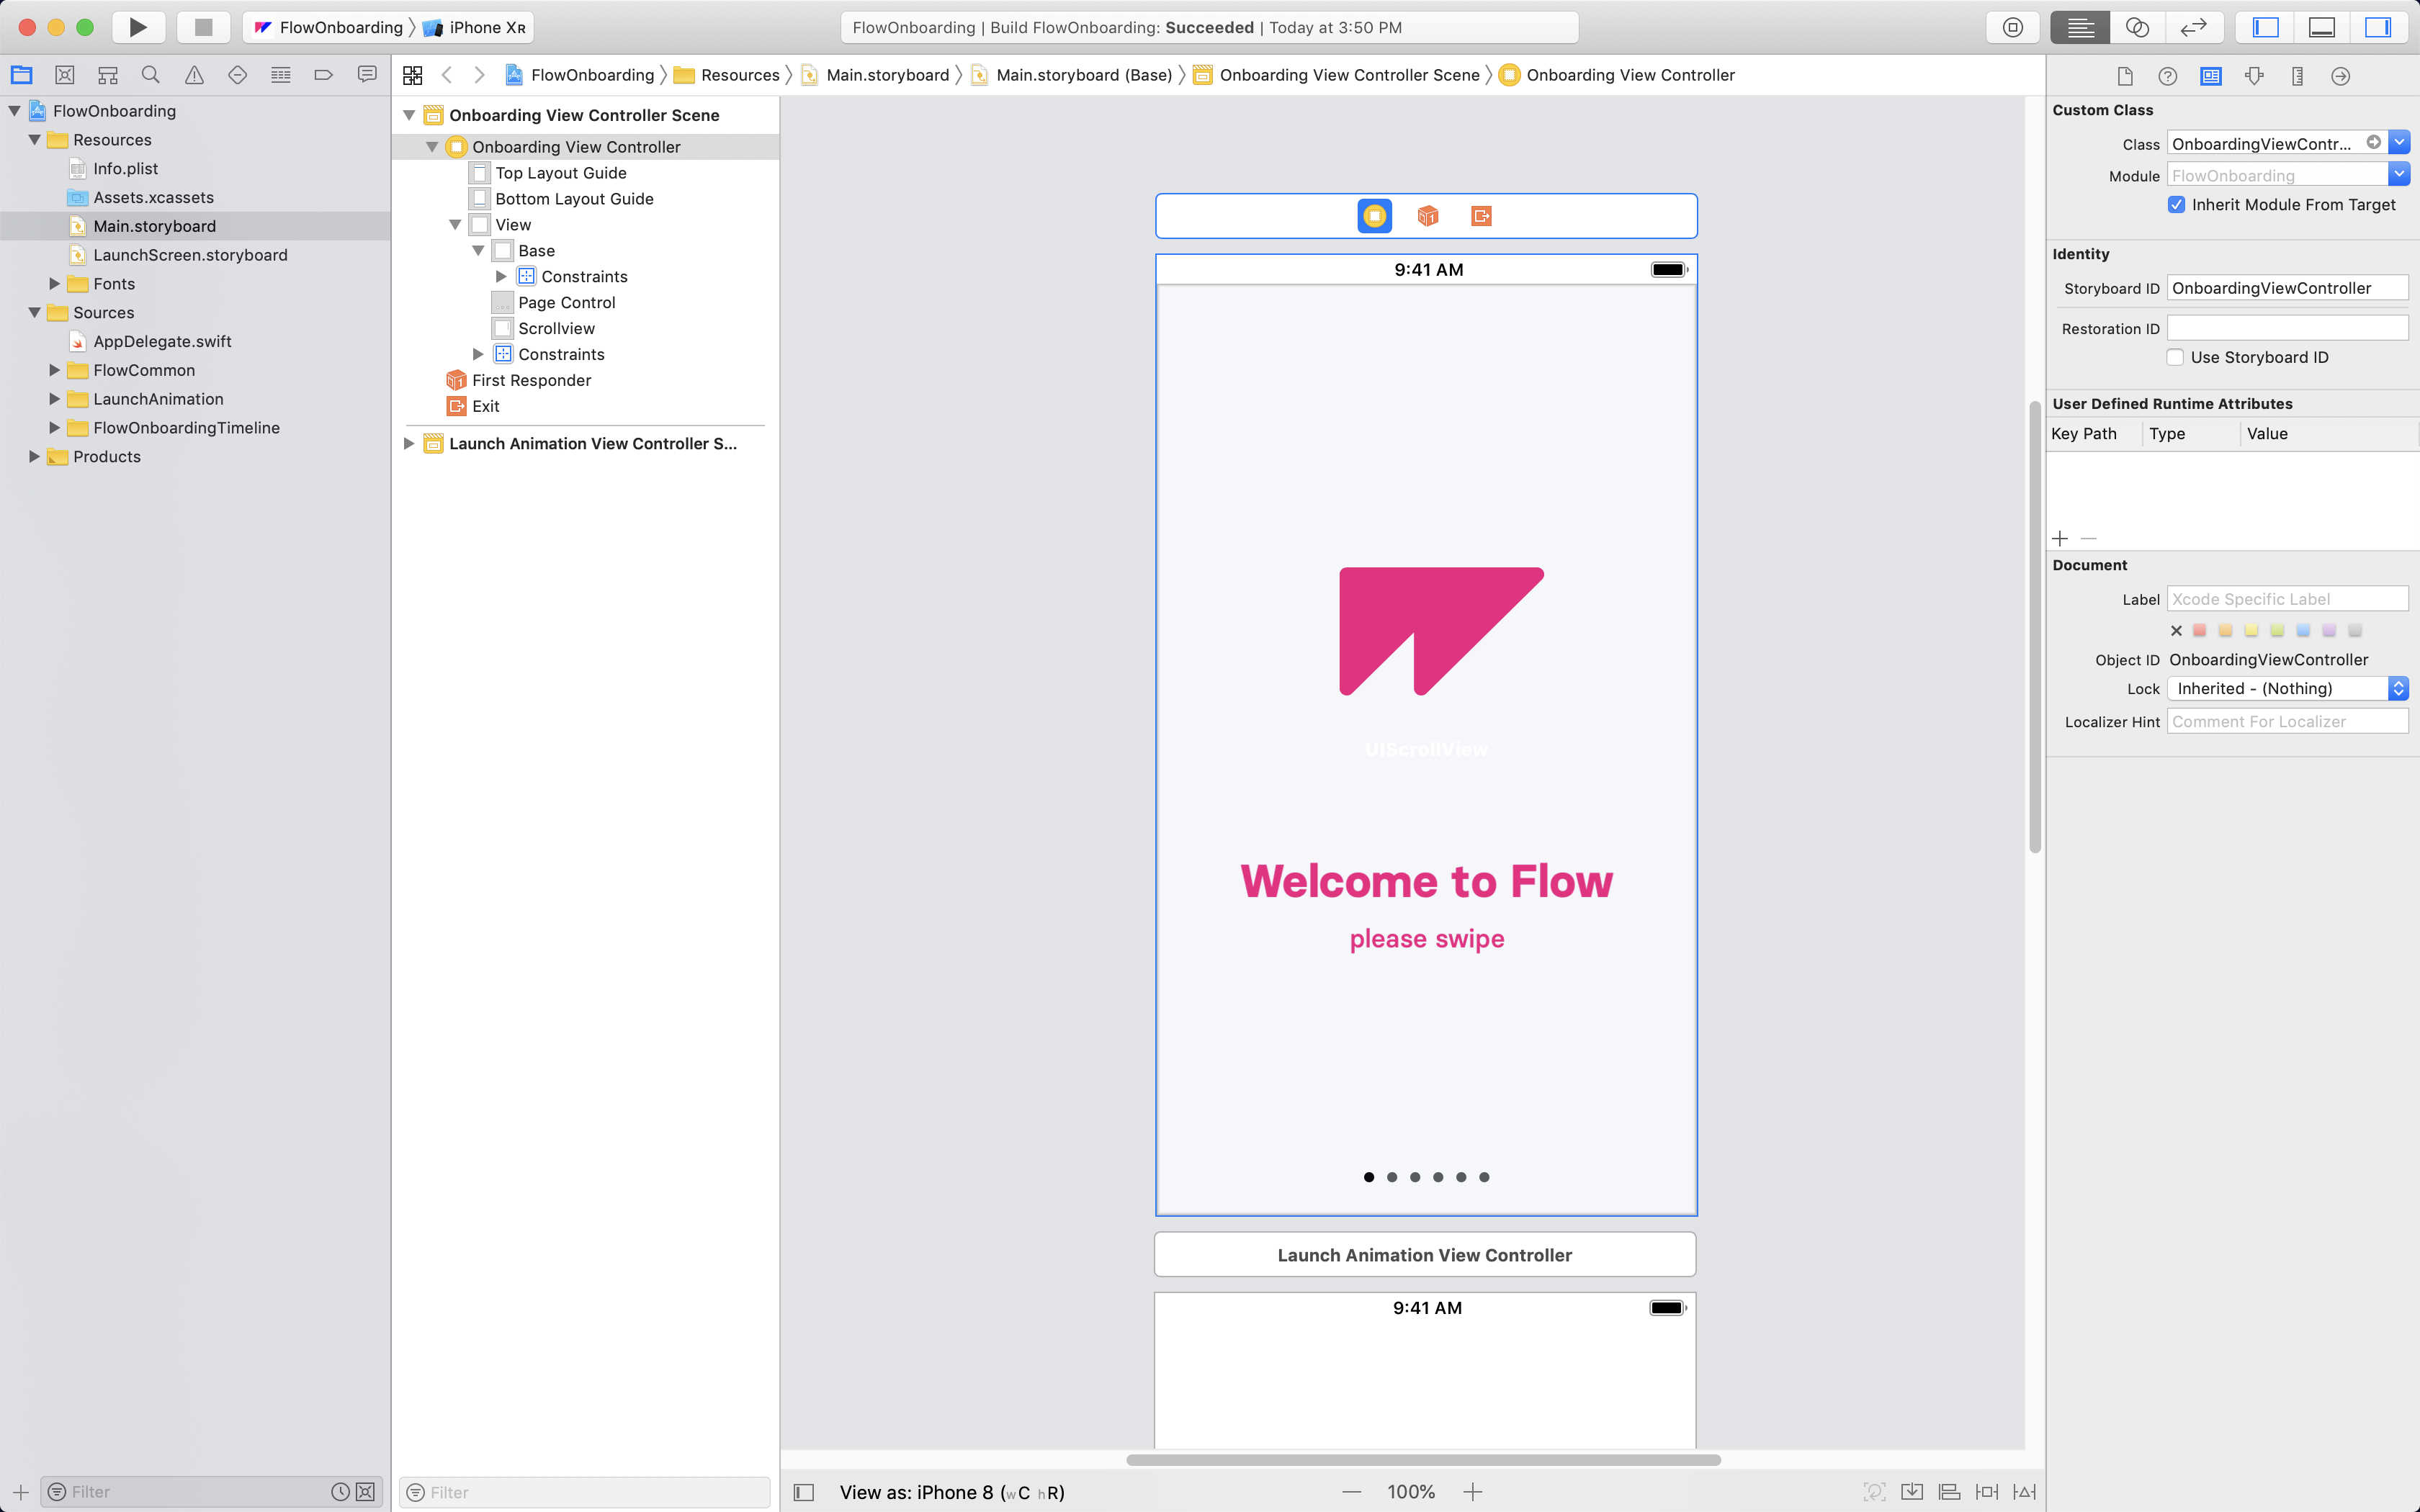 Flow - Understanding the Xcode Project for Onboarding Animations